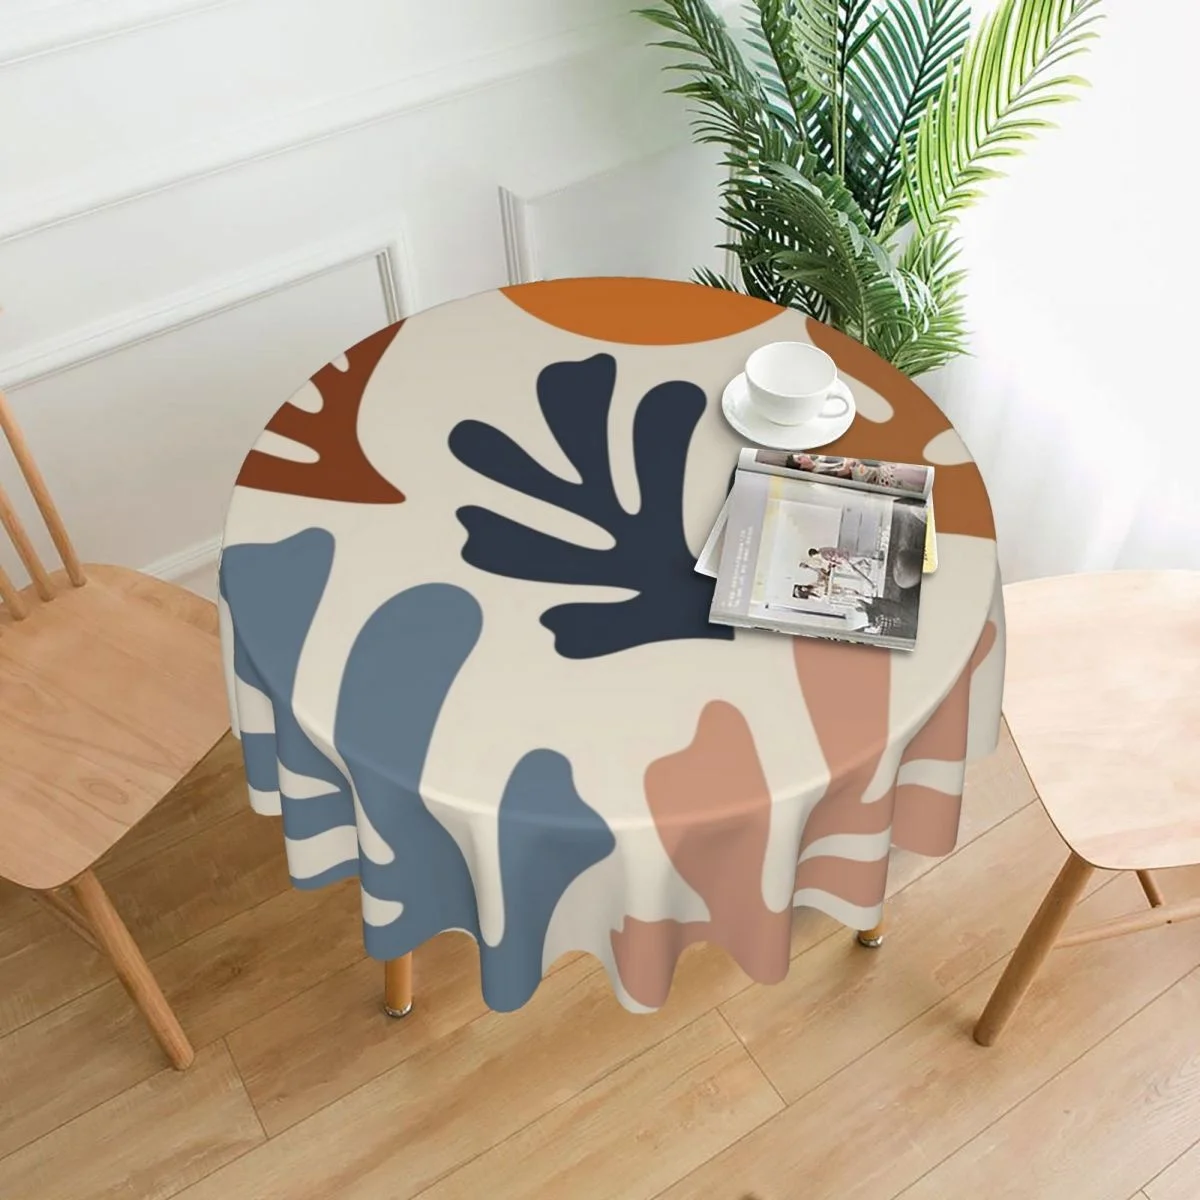 

Cutouts Tablecloth Abstraction Tablecloths Polyester Printed Oilproof Round Manteles for Dining Table Decor